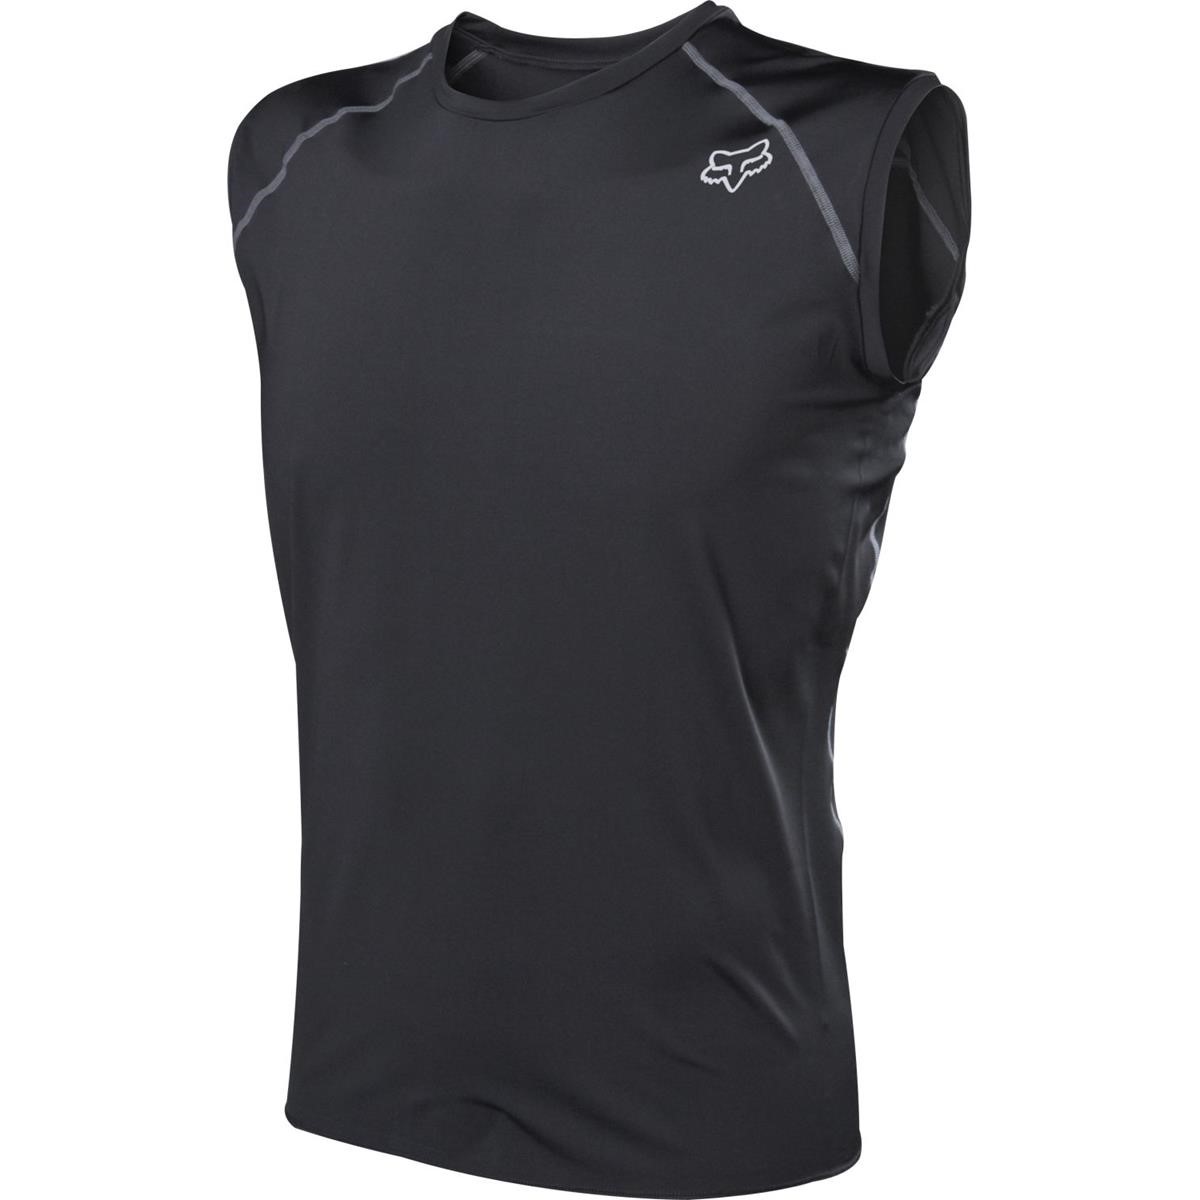 Fox Base Layer Top Sleeveless Frequency Black